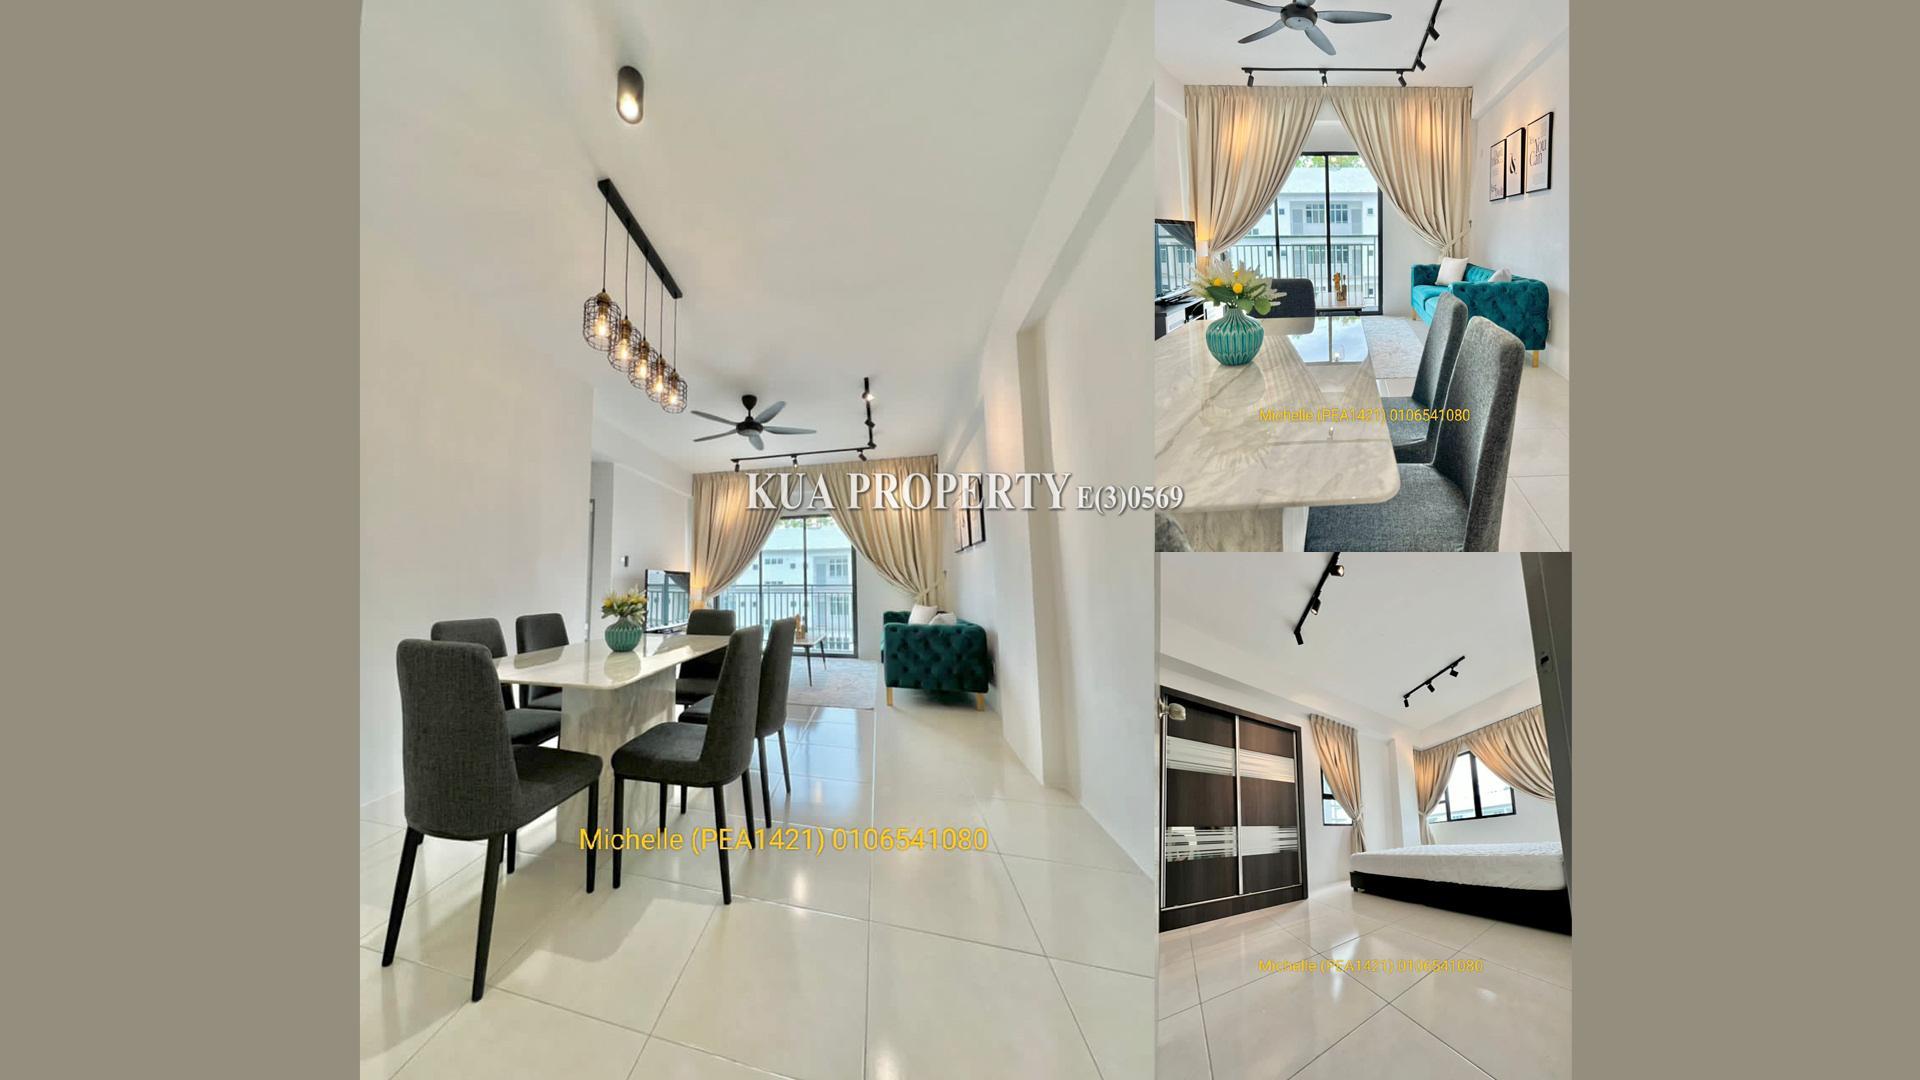 Level 4 The 1878 Apartment For Rent! Located at Tabuan Jaya, Kuching